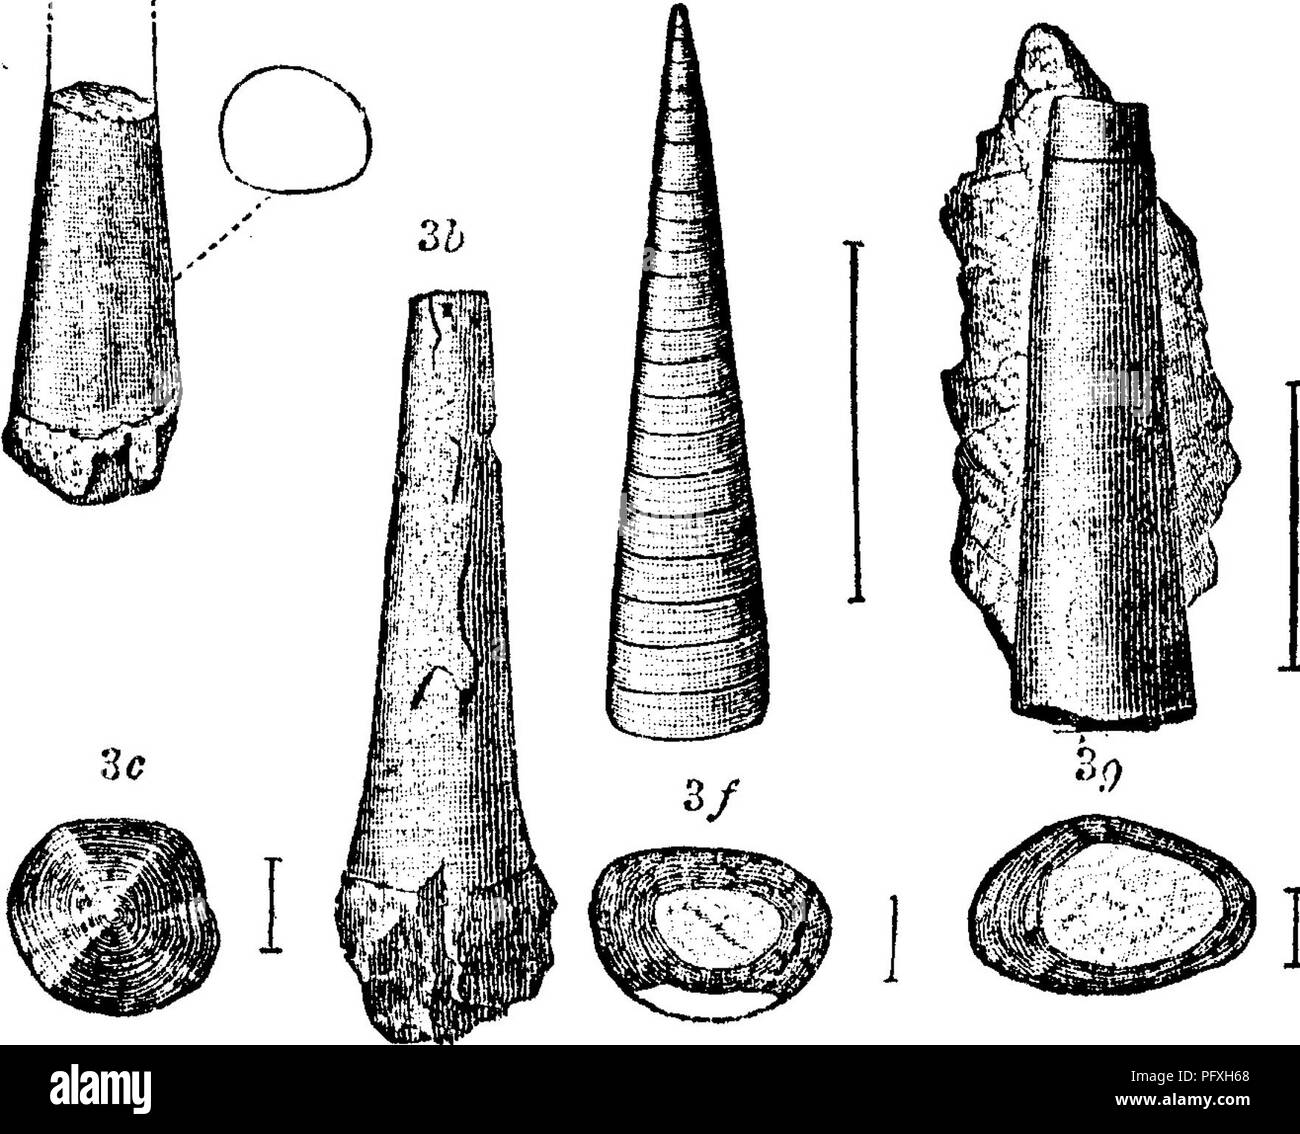 . A dictionary of the fossils of Pennsylvania and neighboring states named in the reports and catalogues of the survey ... Paleontology. times; fig. 6 5, o, cross sections; 6(^, lid (operculum) enlarged twice ; 6 e, lid enlarged Ave times ; fig. 6 f. small broad speci- men, enlarged-five times.-Lower Cambrian (Conglomerate lime- stone) formation at Troy, N. Y., and at Bic and St. Simon, Canada. L. (7.—See foot-note to page 1S4, Hyolithes billingsi. (Salterella ohtusa Billings, Geol. Vt. Pal. Foss. Syoli- j^^P(» 15 thes primordialis ? White, 100th, Mer. Inv. Foss. lY, 1, figs. 5 a—e ; but not T Stock Photo